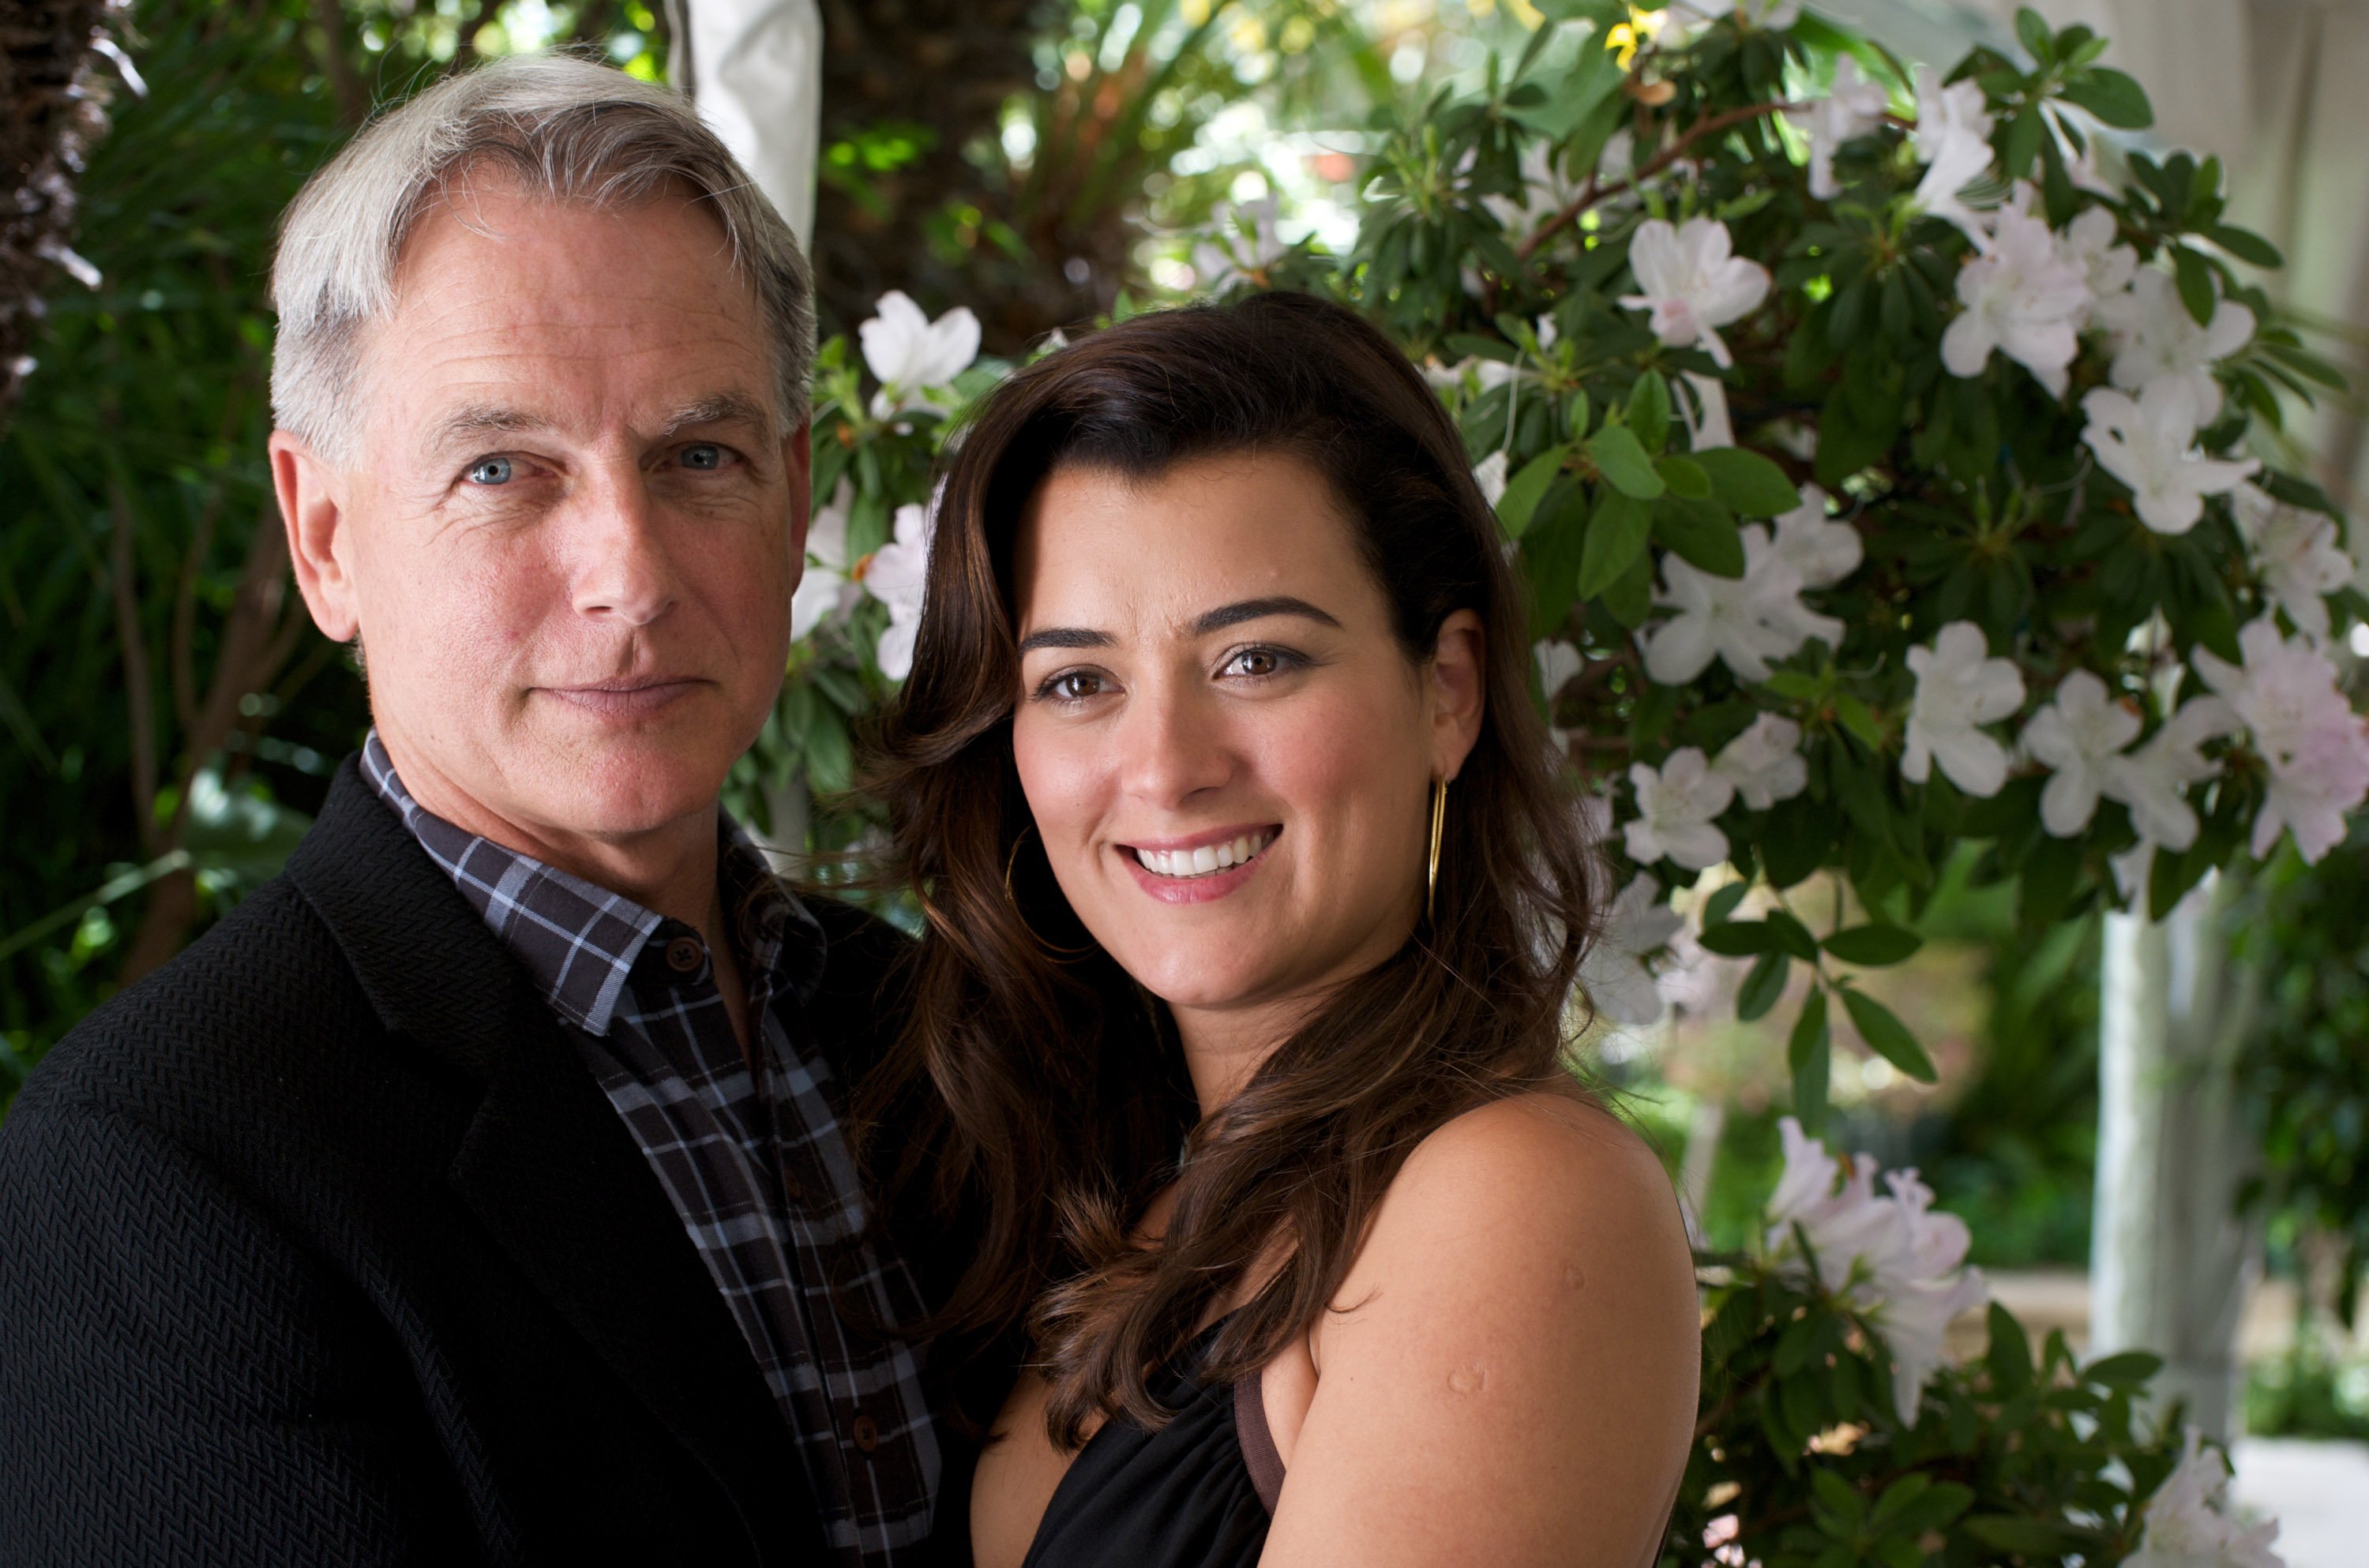 Mark Harmon and Cote de Pablo at the Four Seasons Hotel during the "NCIS" press conference on April 22, 2009 in Beverly Hills | Source: Getty Images